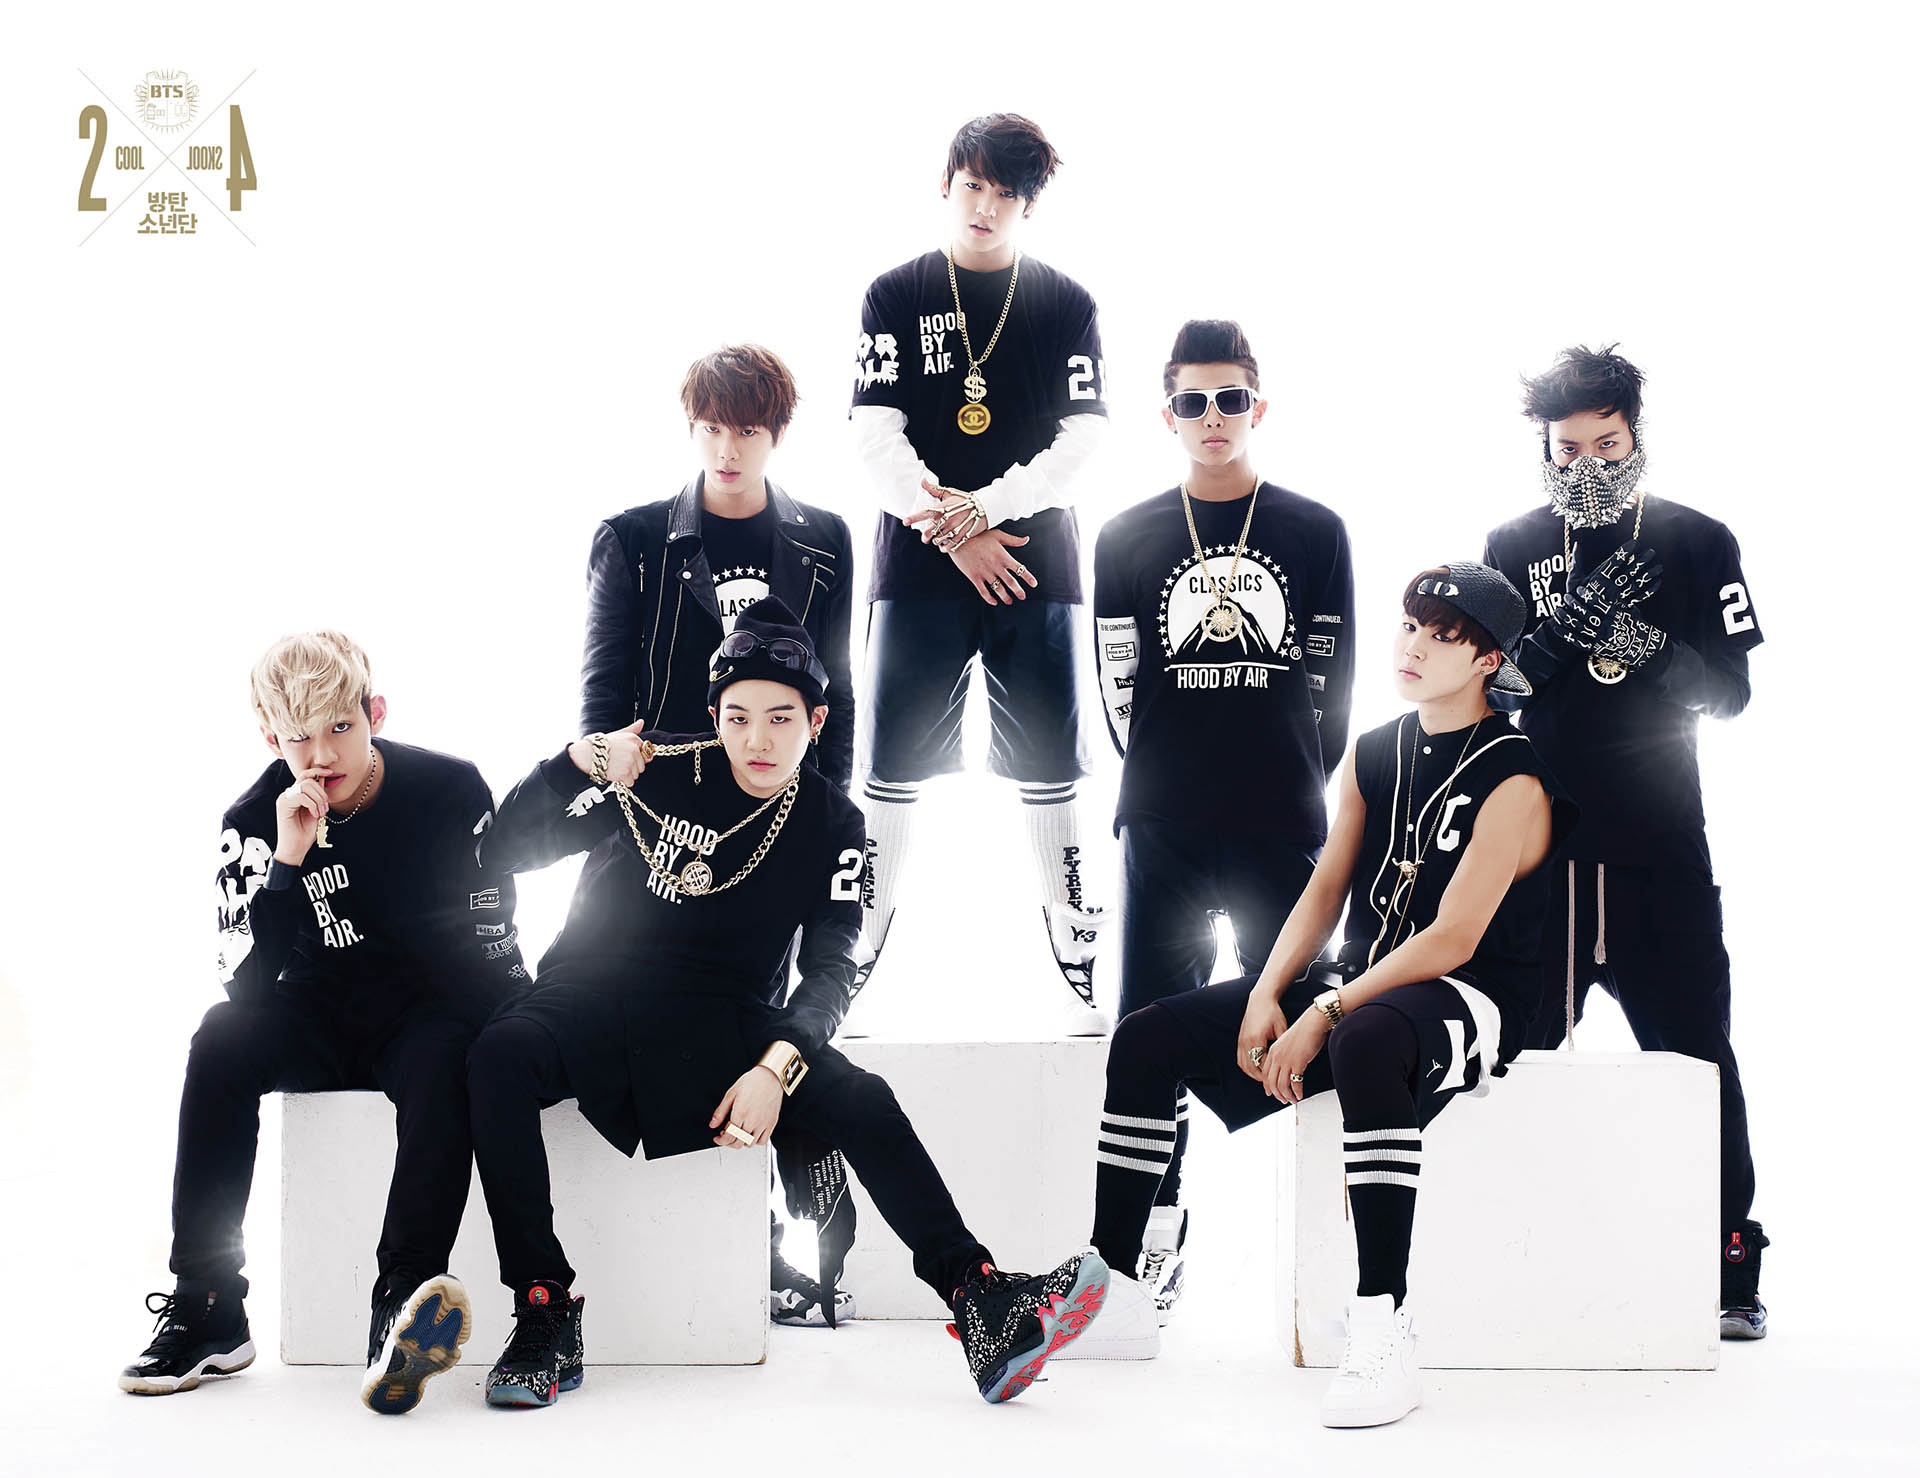 5 KPOP rookie boy bands that mentioned to BTS as role model